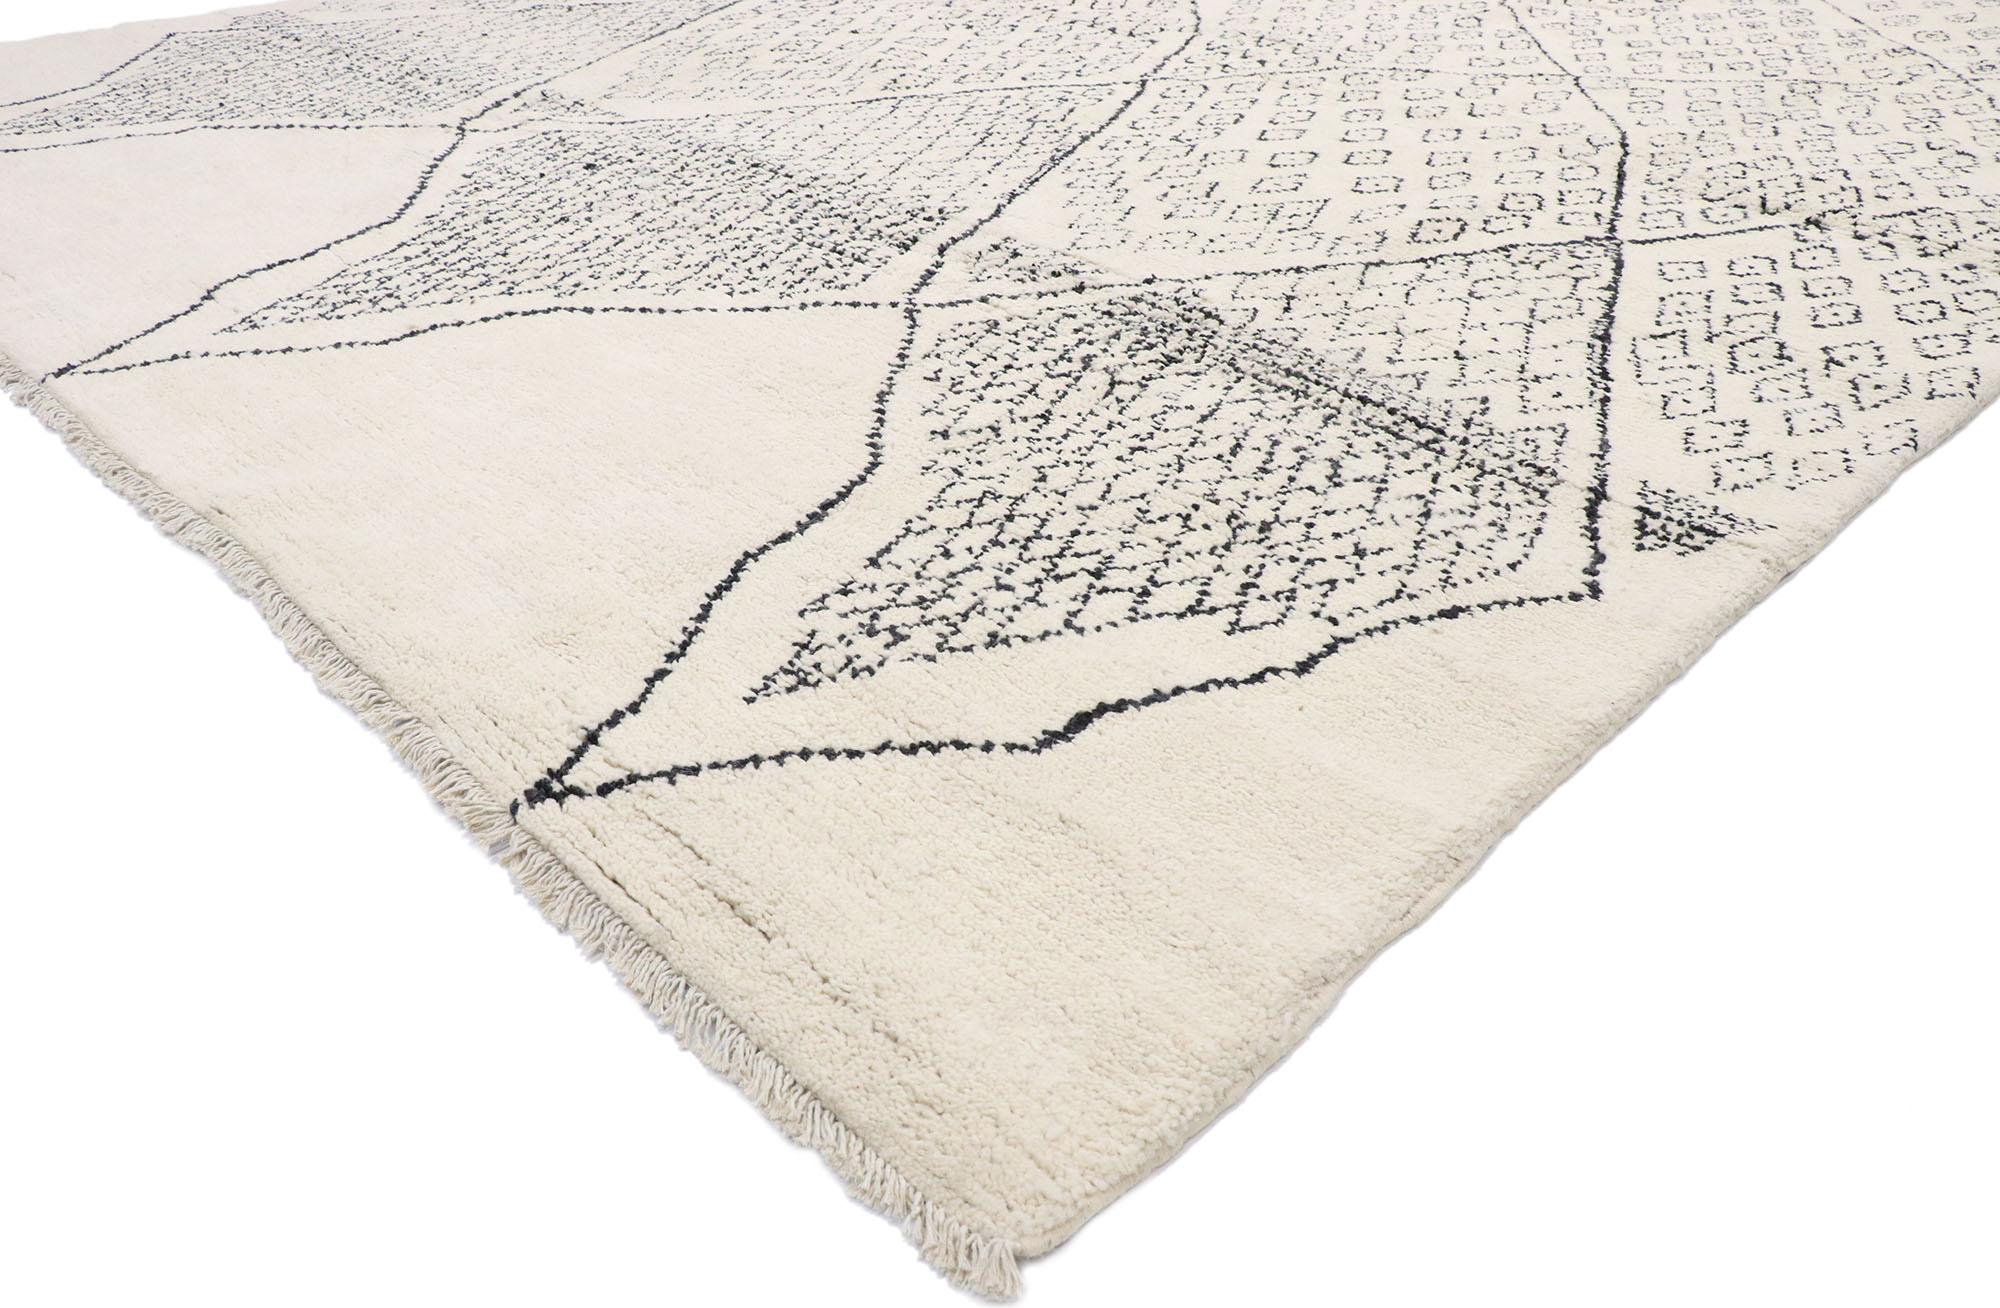 80651, new contemporary Moroccan rug with Scandinavian Mys Bohemian style. Beautiful detail and Scandinavian Mys vibes with incredible texture inspire a cozy Hygge lifestyle in this hand knotted wool contemporary Moroccan rug. The ivory-beige field